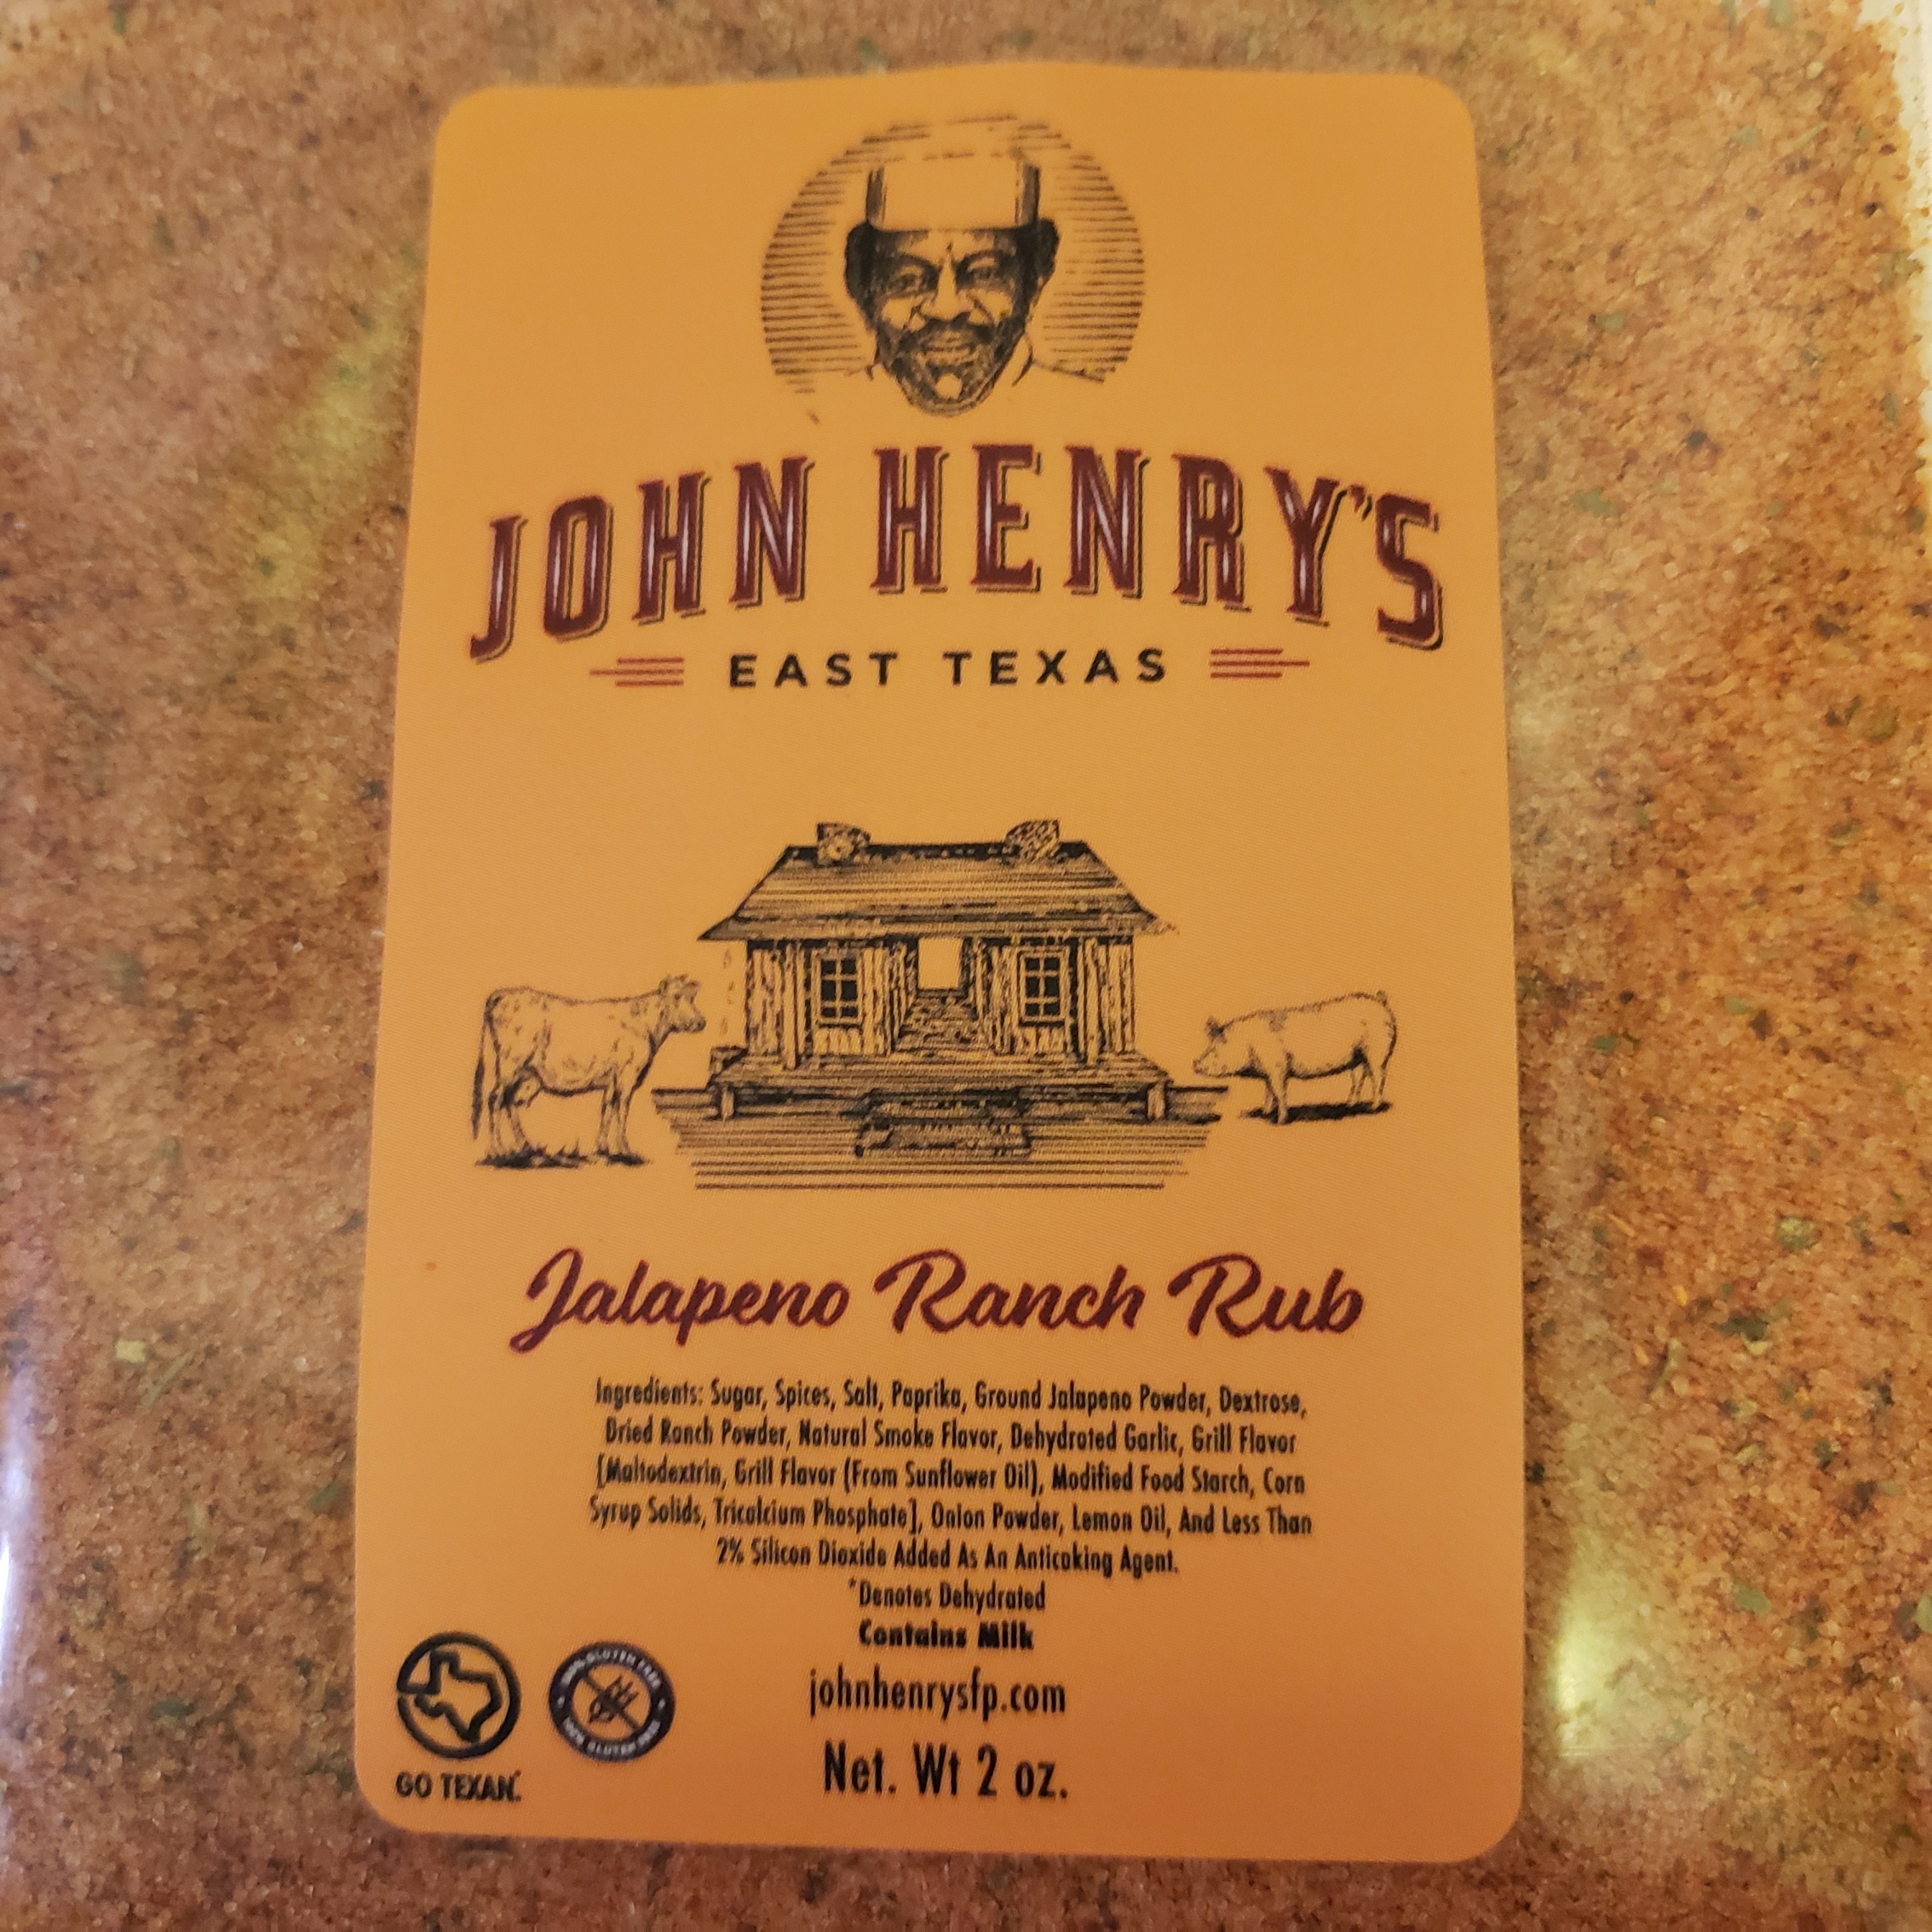 BBQ Barbeque Seasoning and Outdoor Grilling John Henry's Jalapeño Ranch Rub 